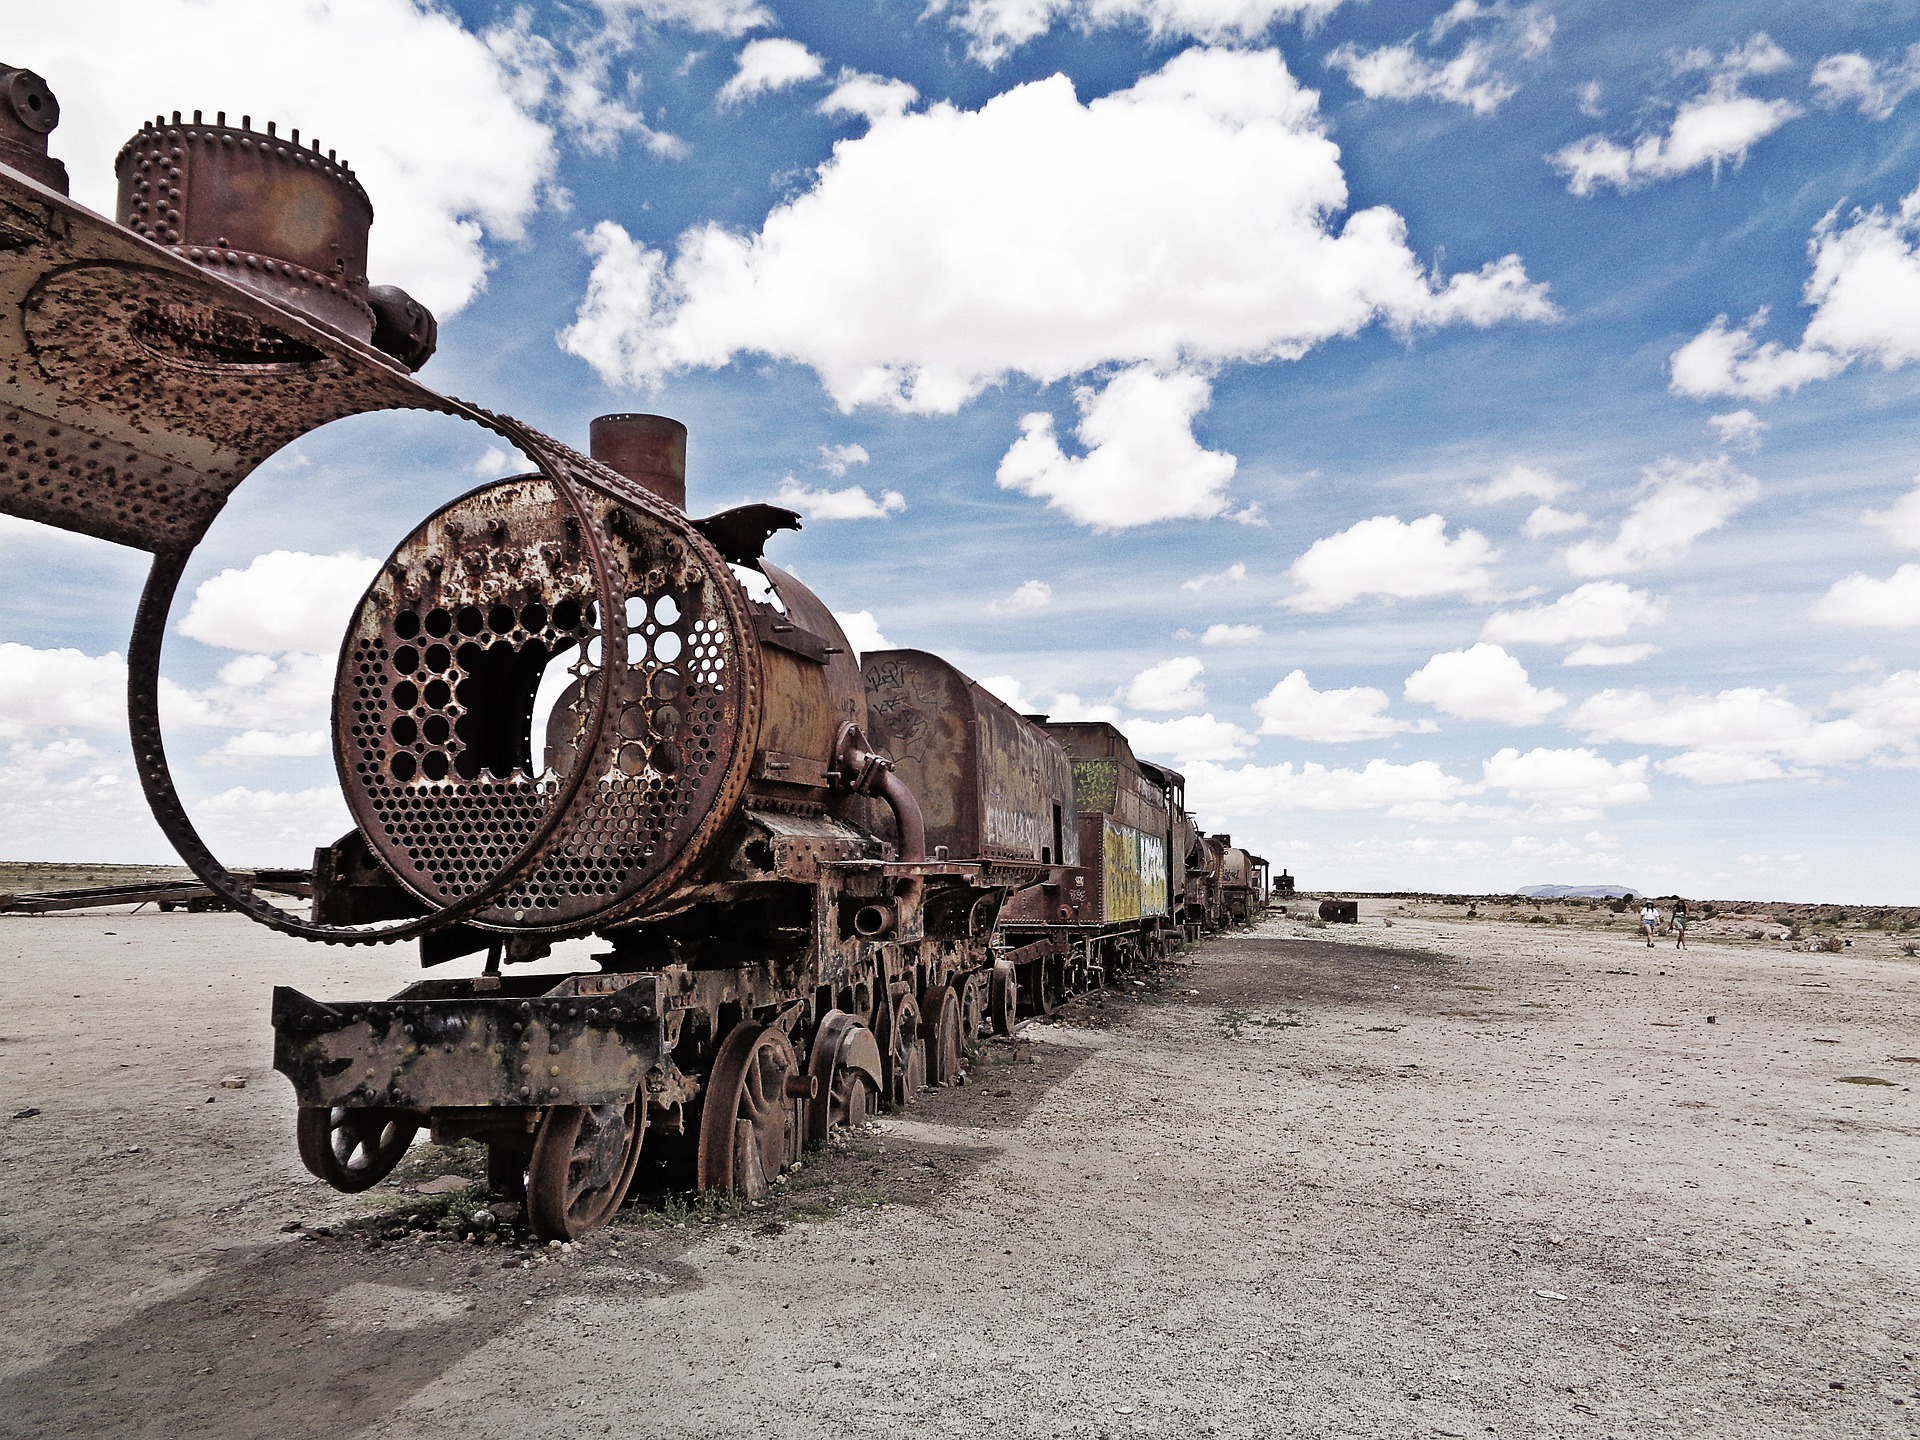 A line of abandoned train cars against a blue sky with clouds in the desert.